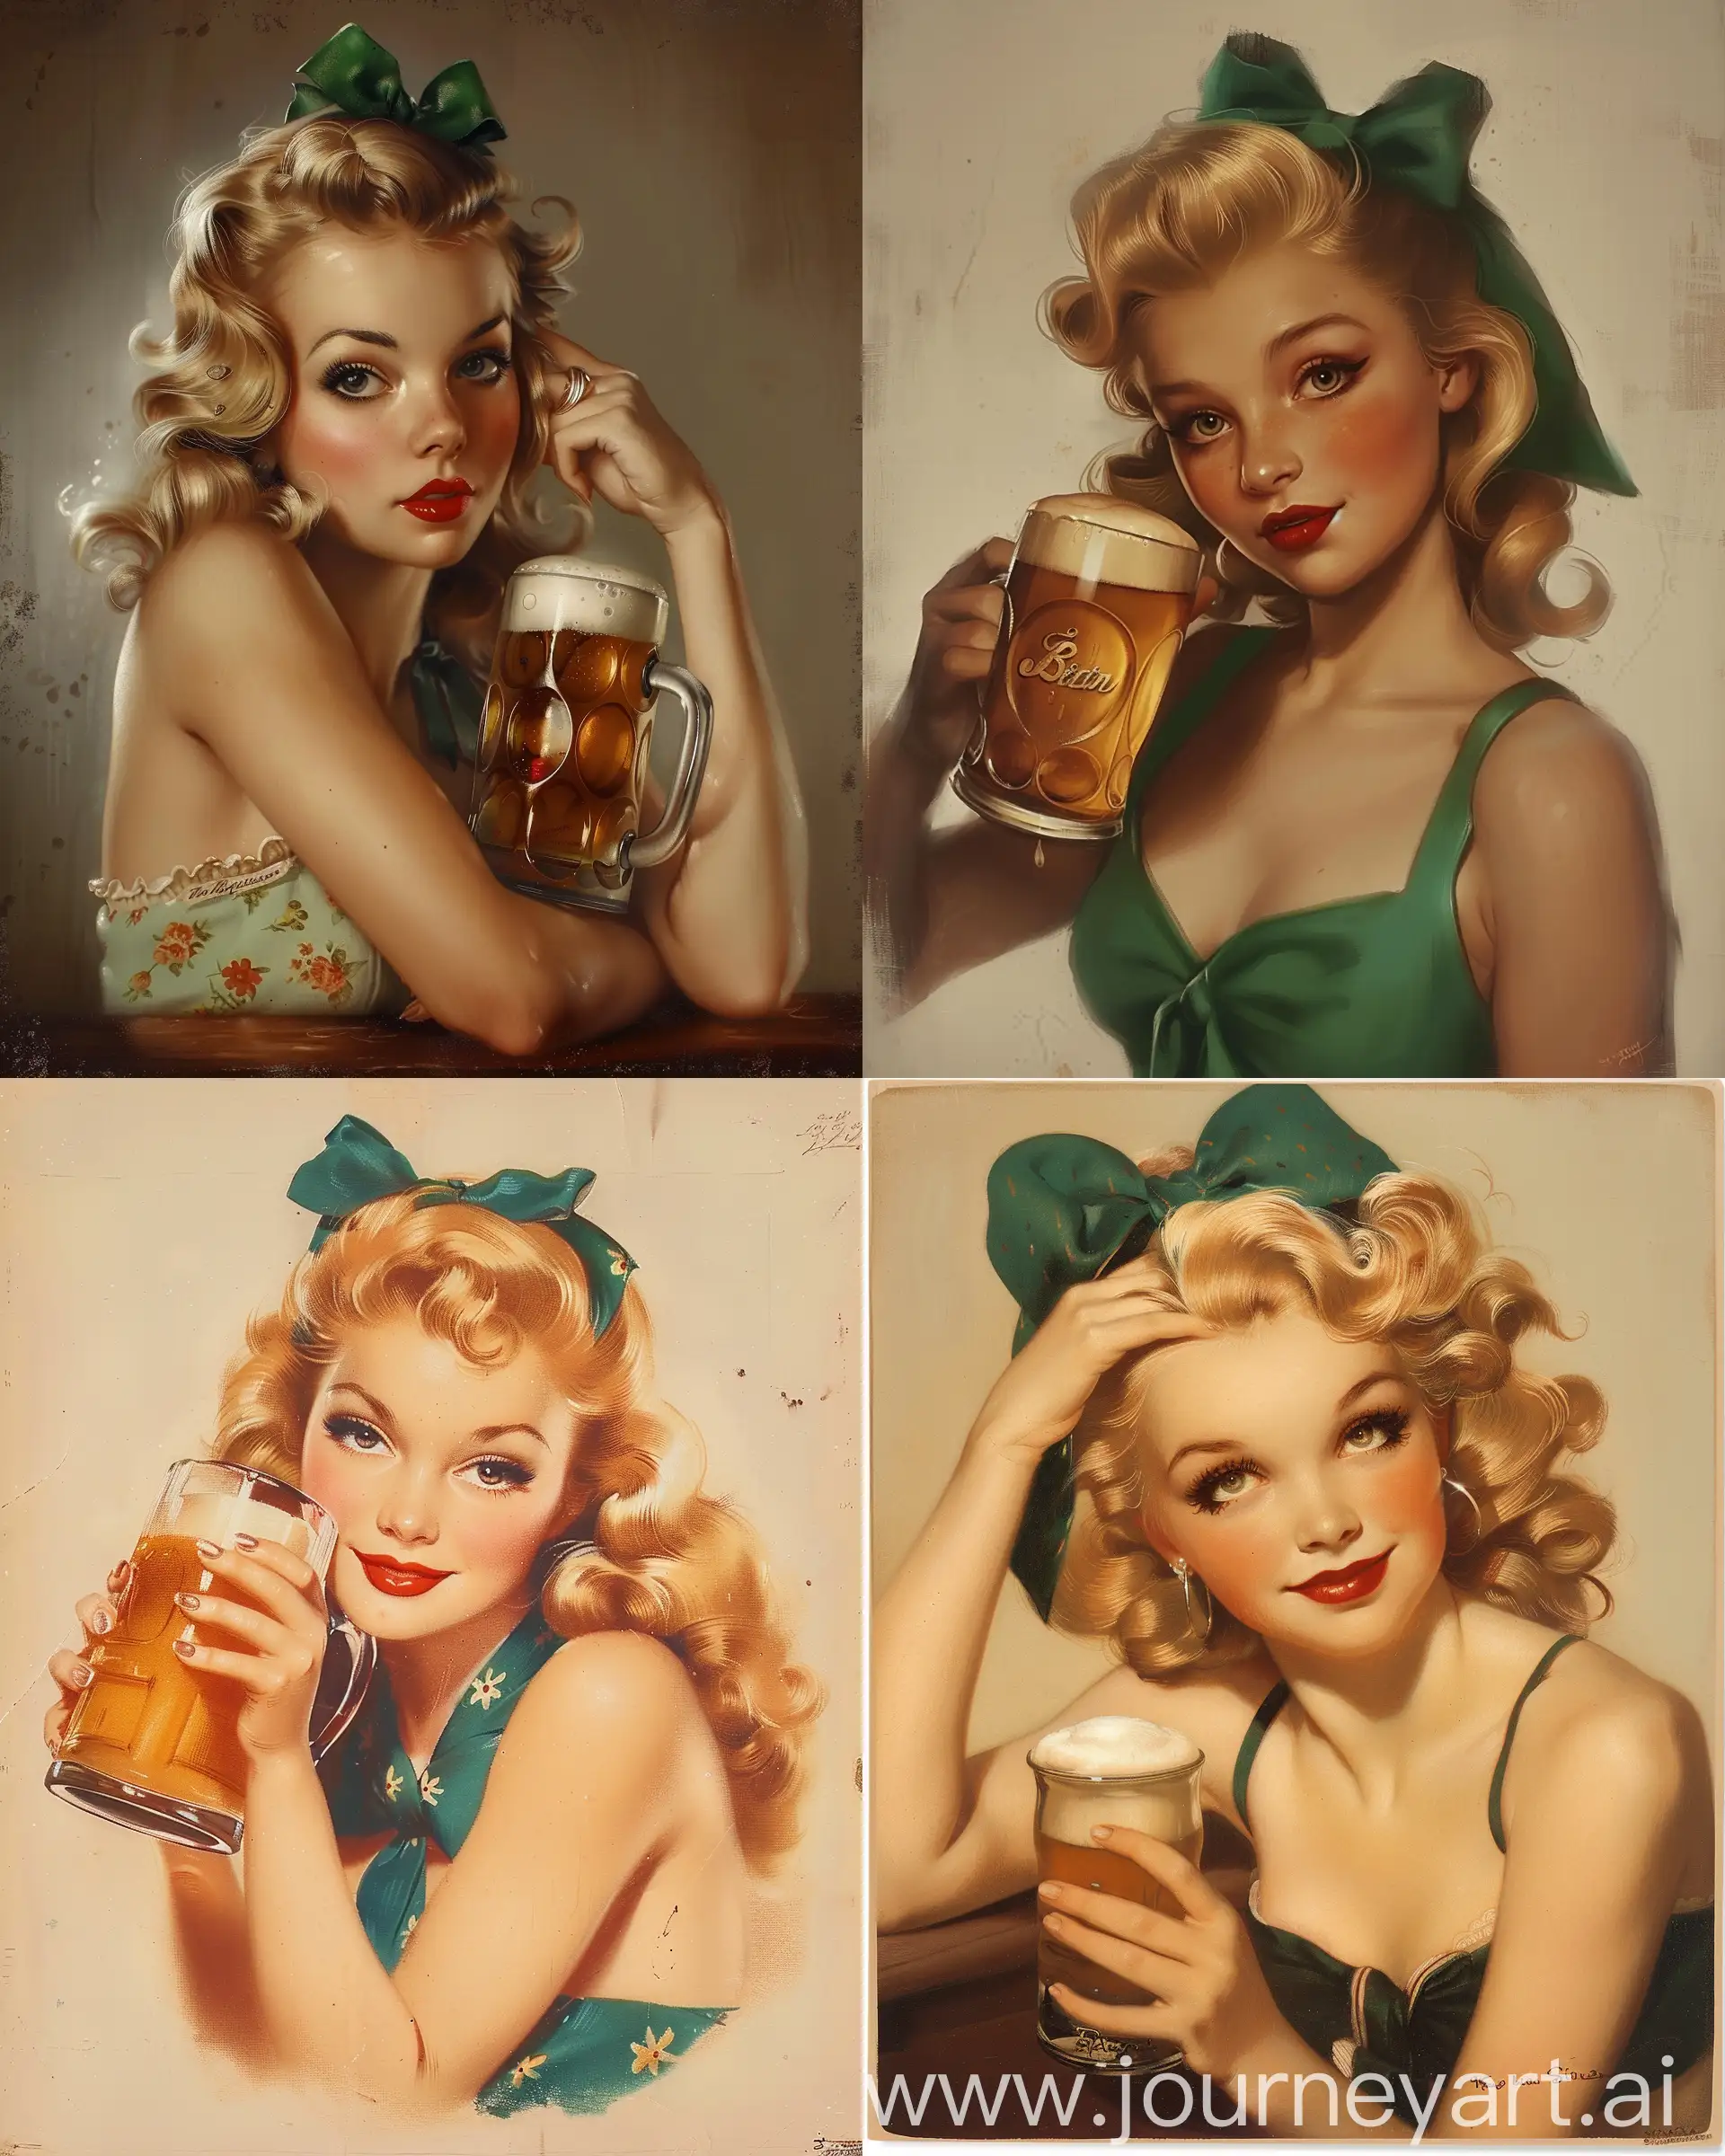 vintage pin-up girl holding beer mug, mid-20th century American style, fair skin, red lips, blonde victory roll curls, green bow, St. Patrick's Day outfit, sweetheart neckline, knot detail, frothy beer mug, transparent sides, plain white background:: classic illustration, high resolution, vintage theme, 1950s fashion, traditional tattoo art, Norman Rockwell, Gil Elvgren, retro pin-up, detailed, close-up, portrait:: soft lighting, warm tones, vintage camera filters, shallow depth of field, medium format lens, bokeh, vintage grain, 1950s color palette:: --ar 4:5